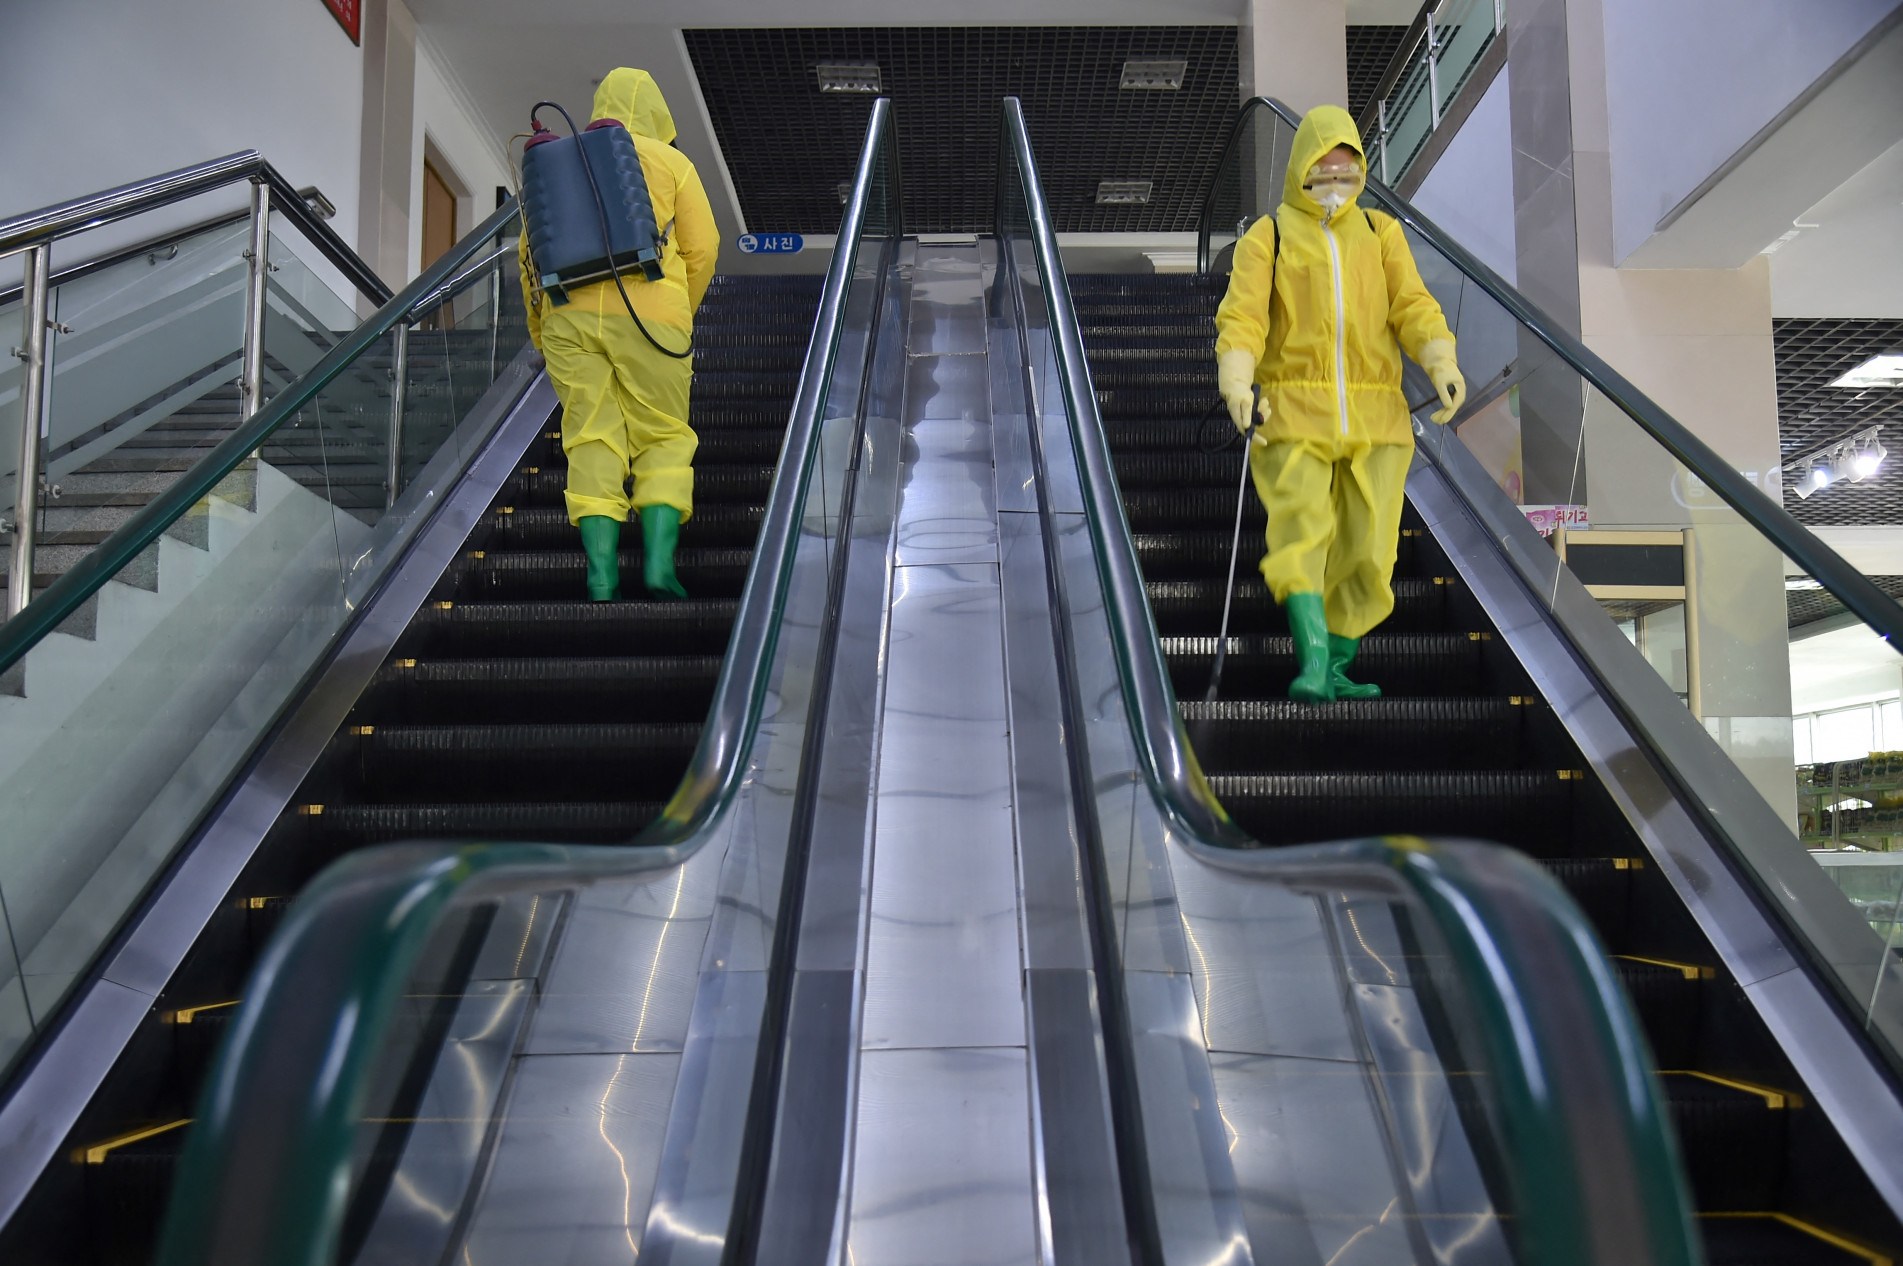  (FILES) In this file photo taken on March 18, 2022 employees spray disinfectant as part of preventative measures against the Covid-19 coronavirus at the Pyongyang Children's Department Store in Pyongyang. - North Korea on May 12, 2022 confirmed its first-ever case of Covid-19, with state media declaring it a 